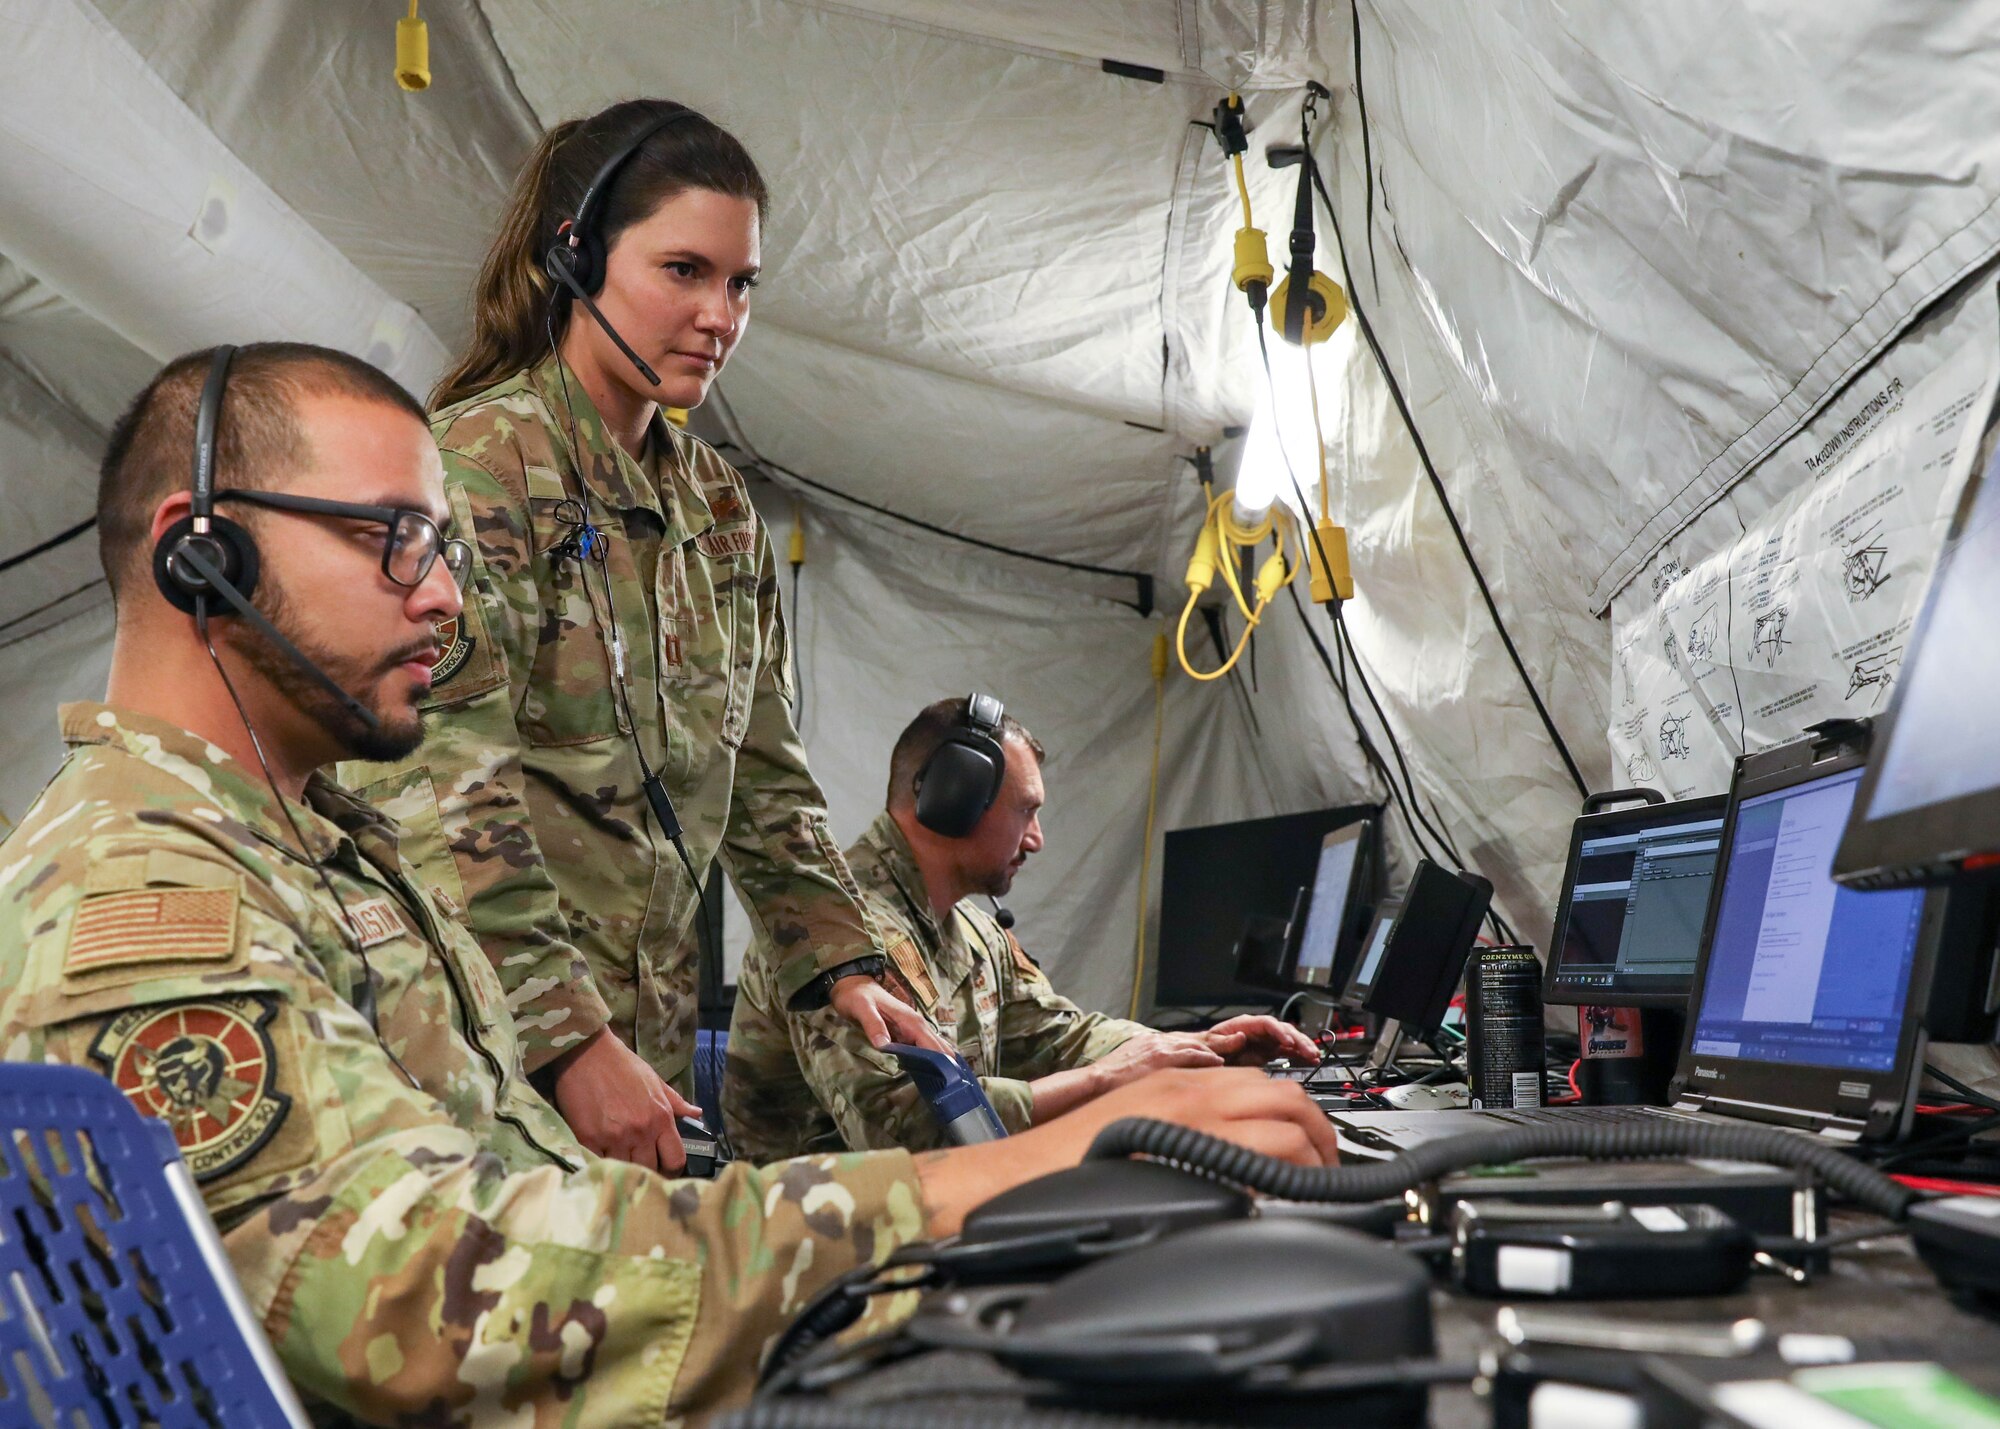 photo of military members working on computers